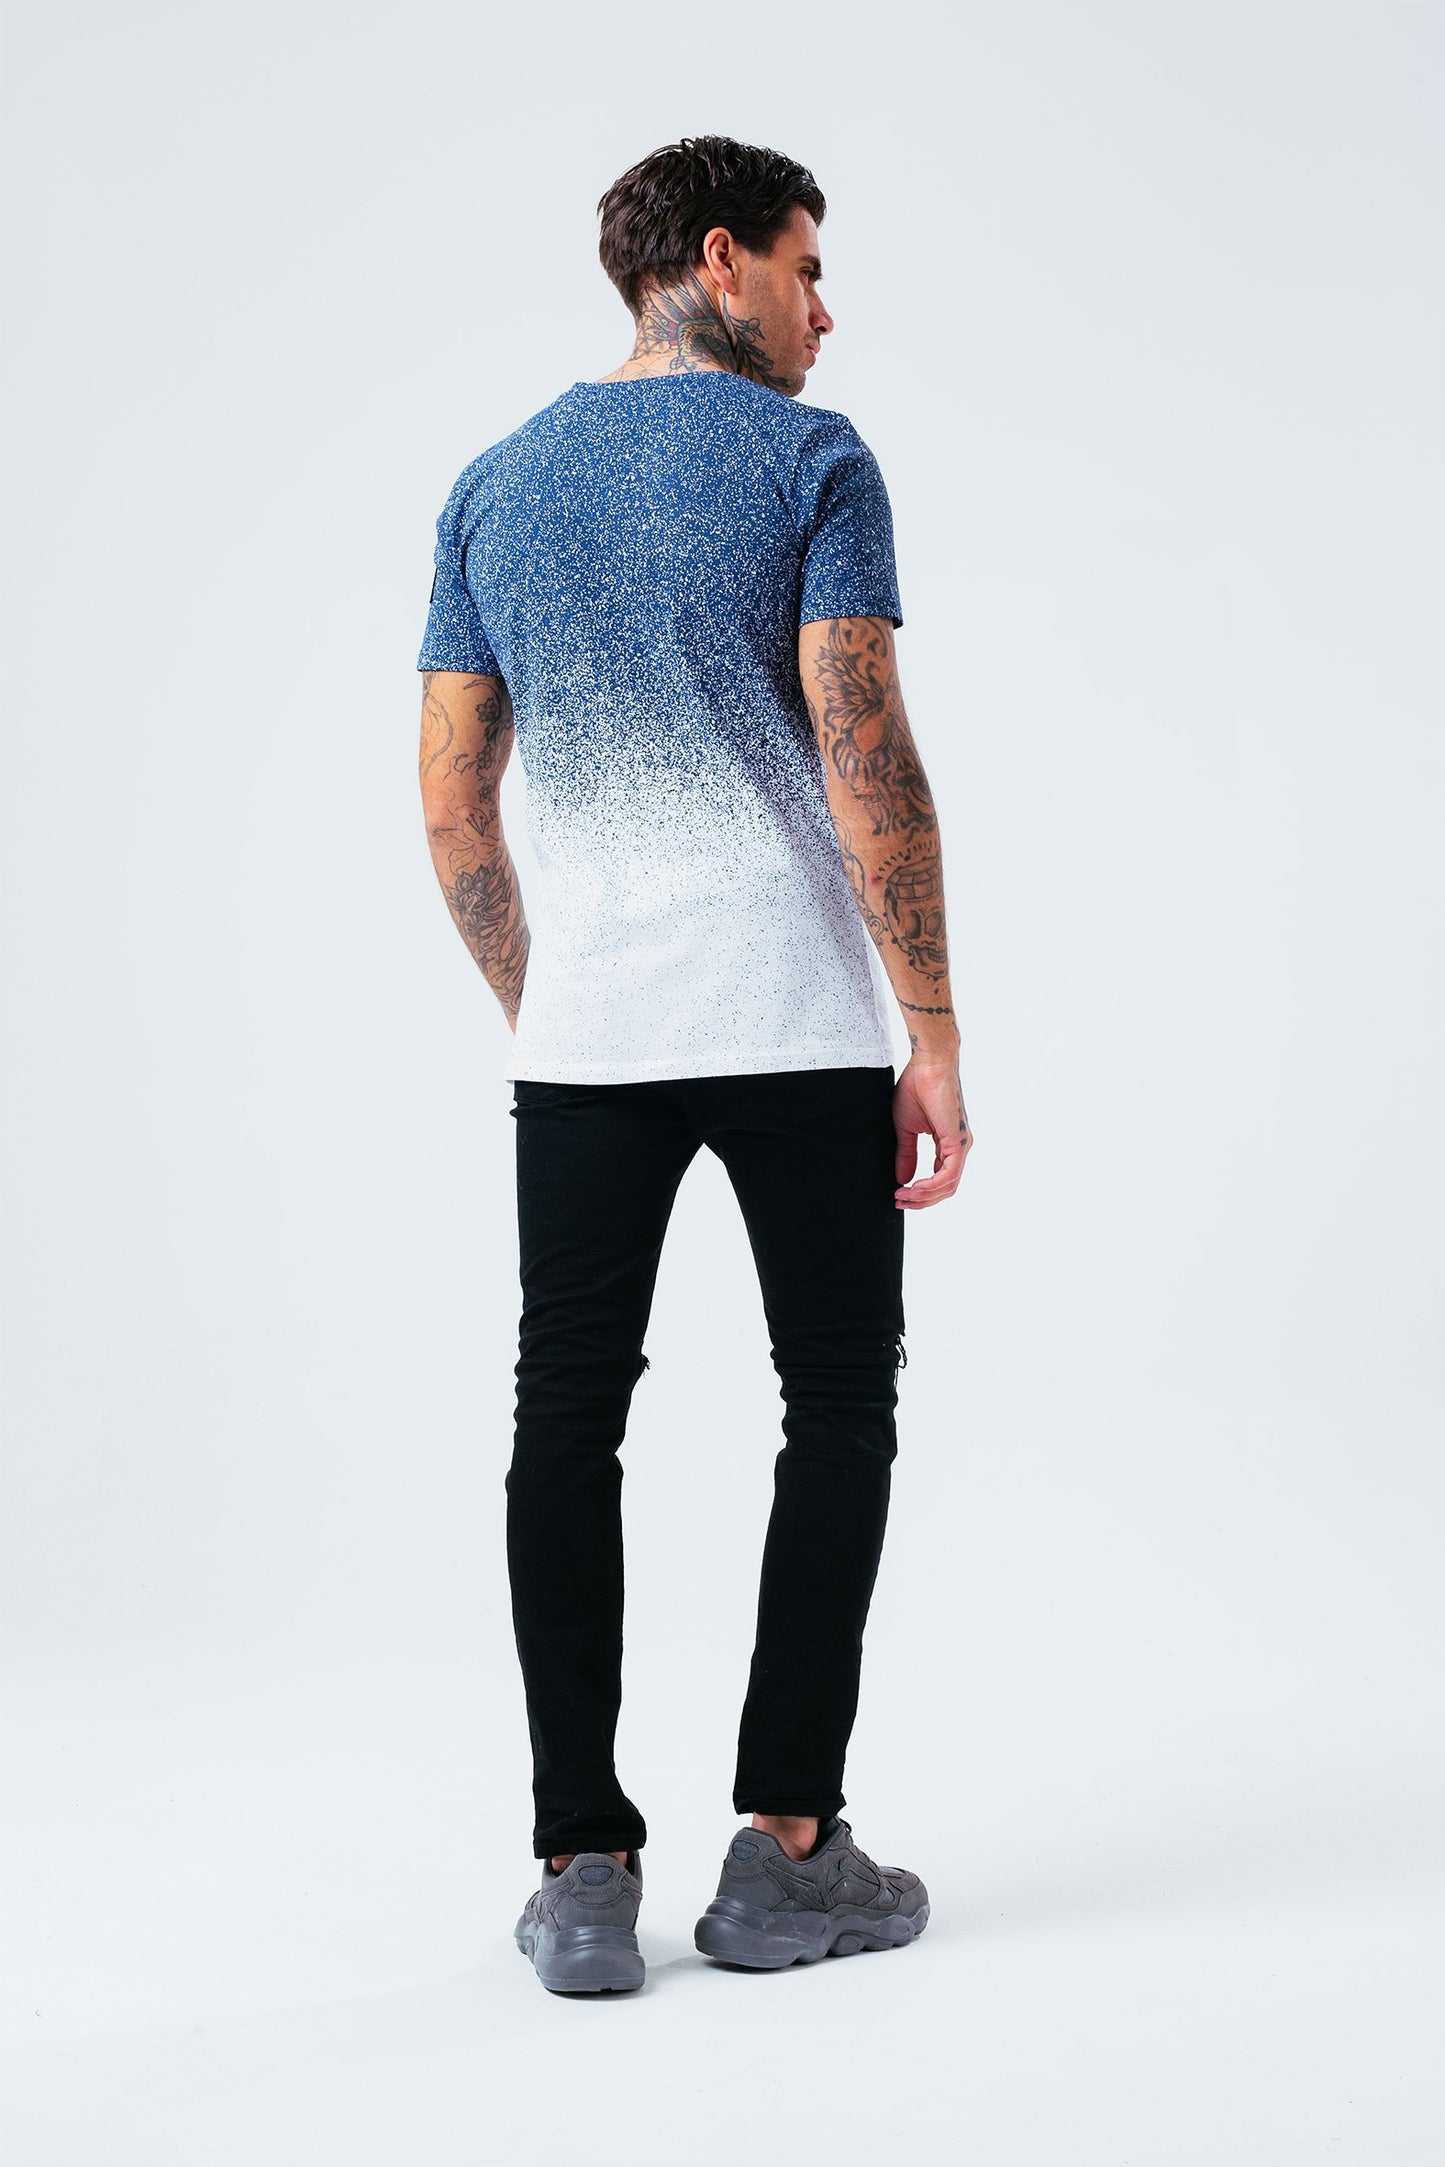 HYPE NAVY WHITE SPECKLE FADE MEN'S T-SHIRT